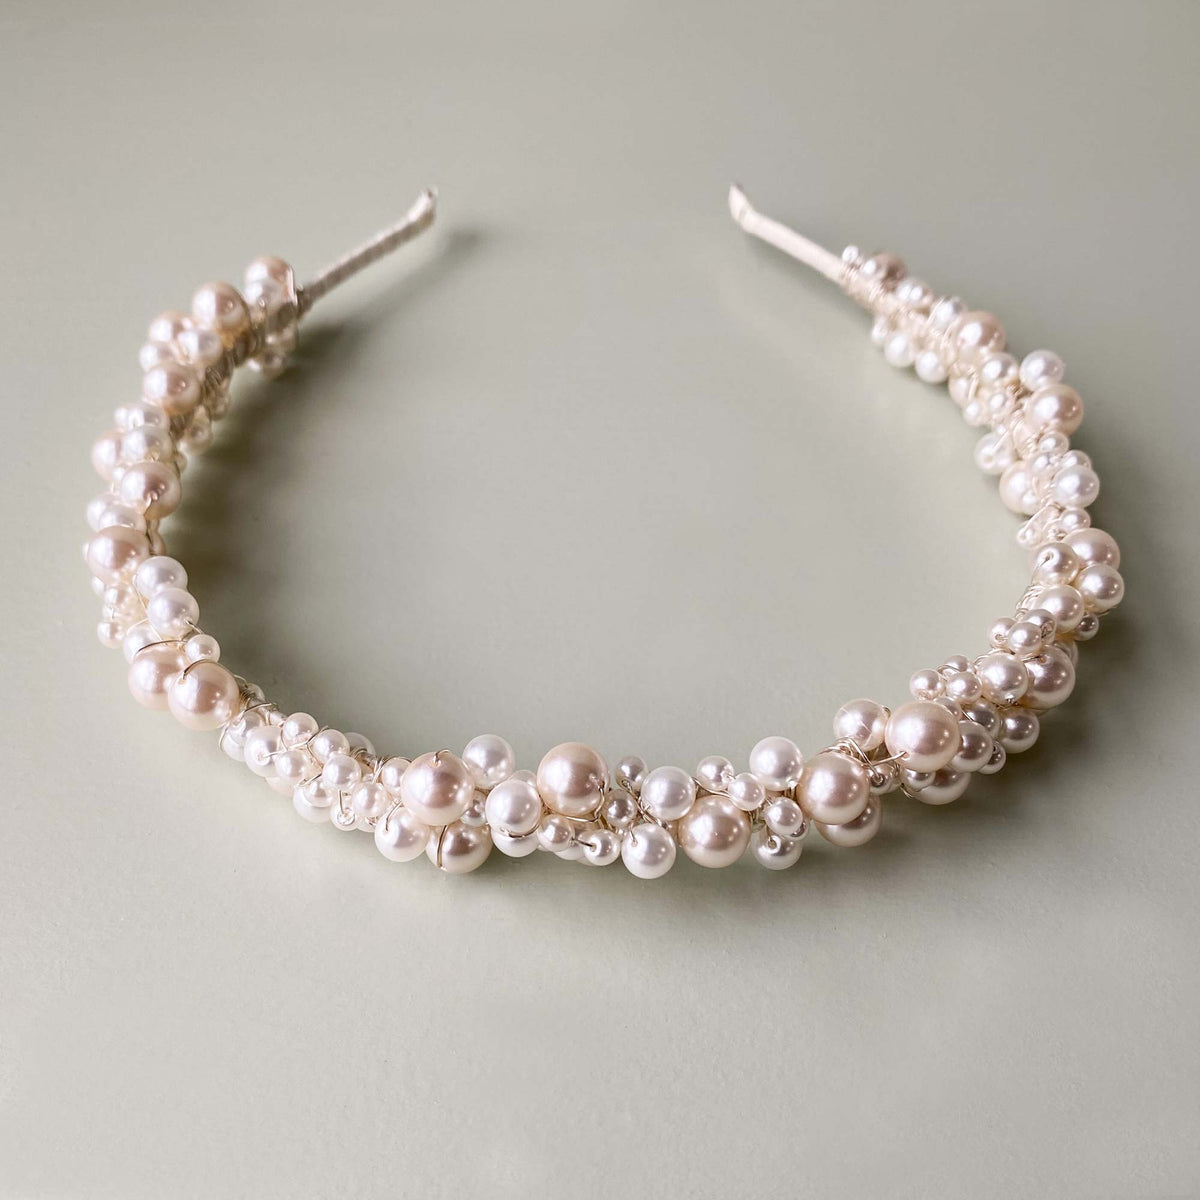 Wedding Headband Silver / Silver sparkle (as in images) Pearl Headband - Nicole